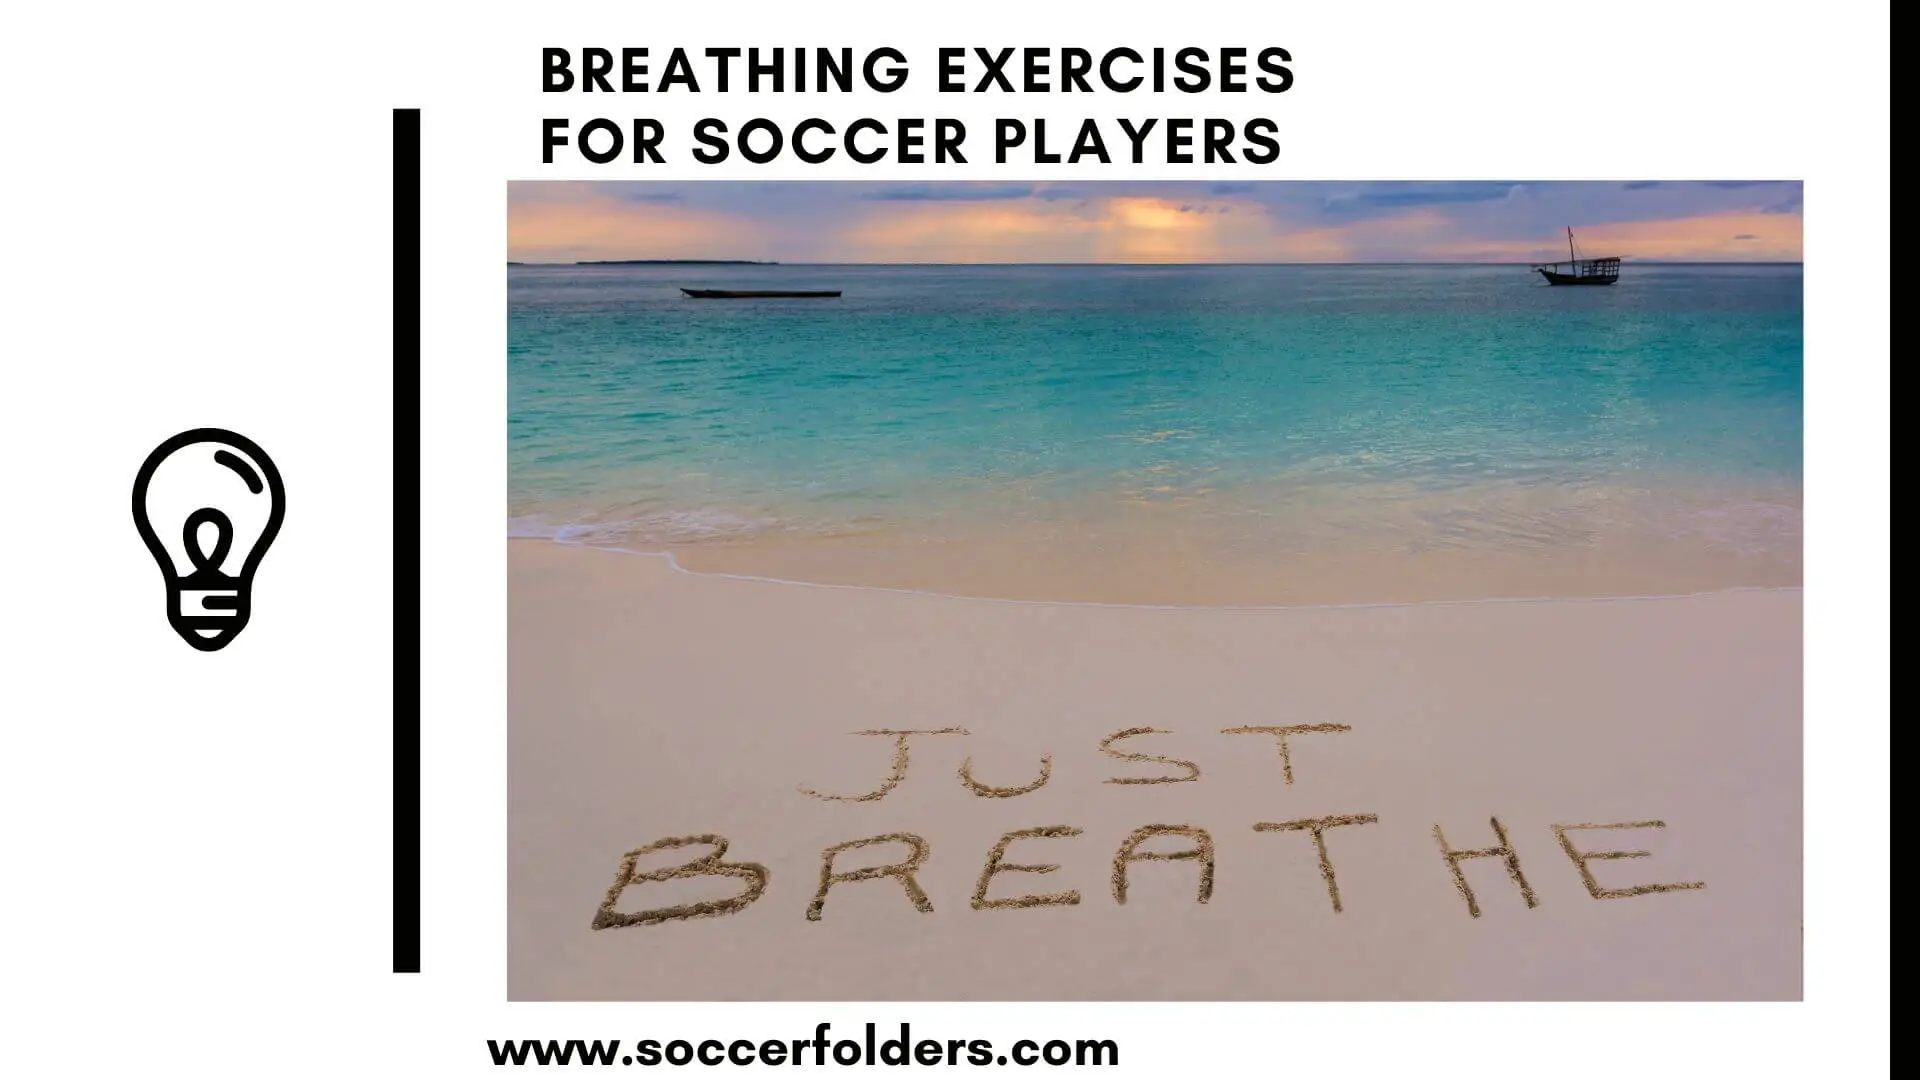 Breathing exercises for soccer players - Featured Image